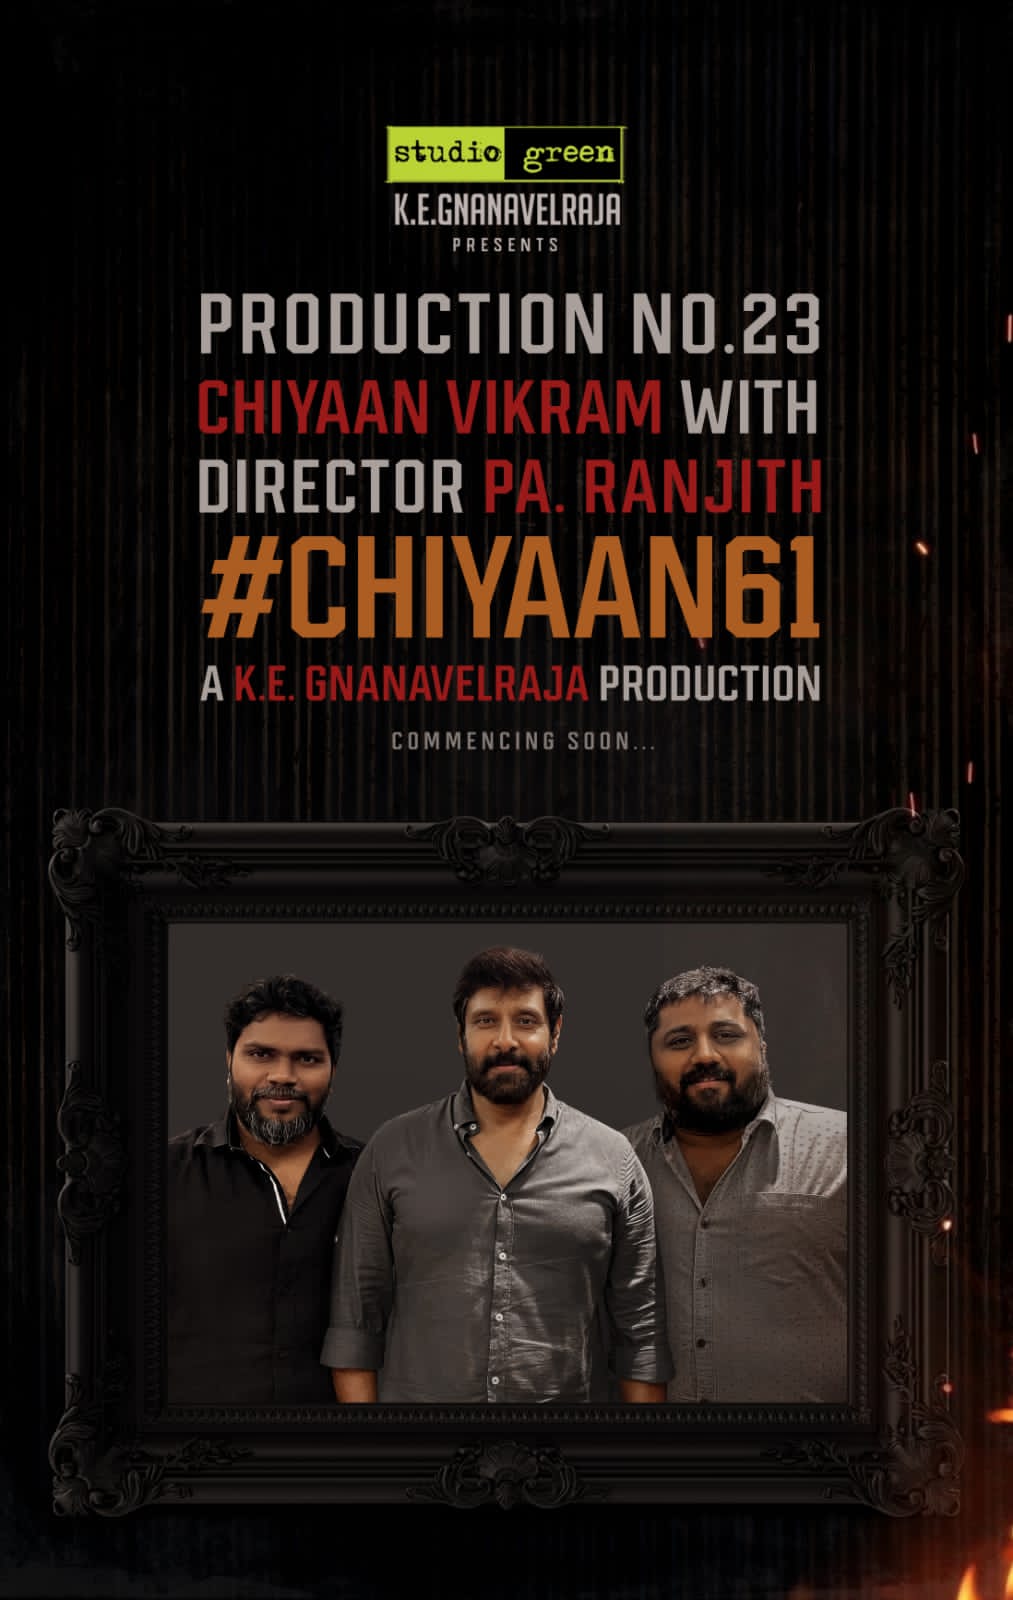 GVP is the music director for Chiyaan 61 announcement soon